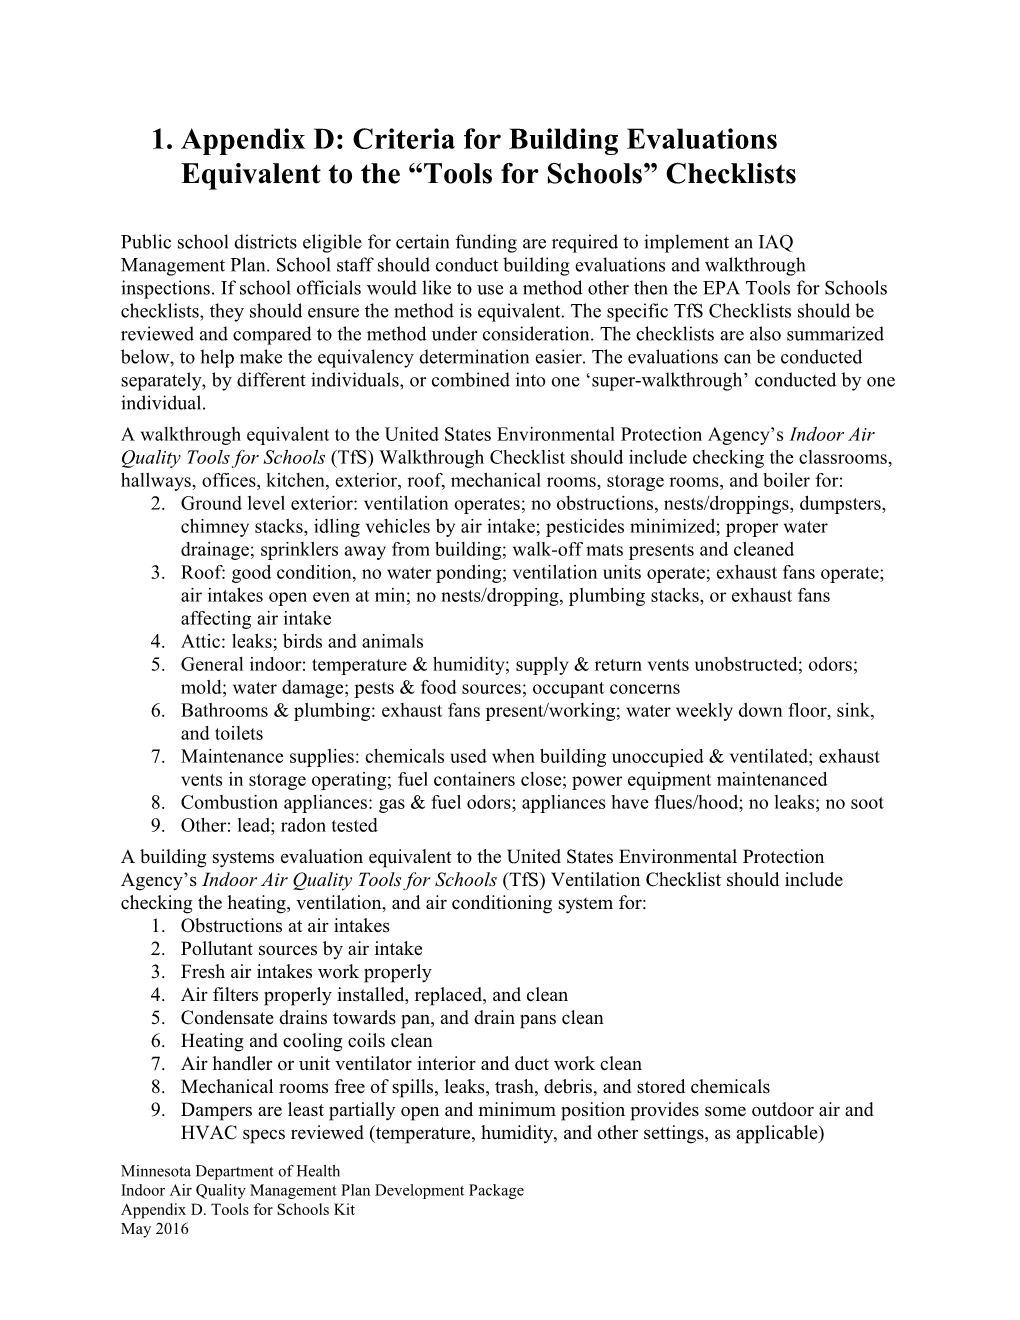 Attachment 4: Criteria for Building Systems Evaluations Equivalent to the Tools for Schools